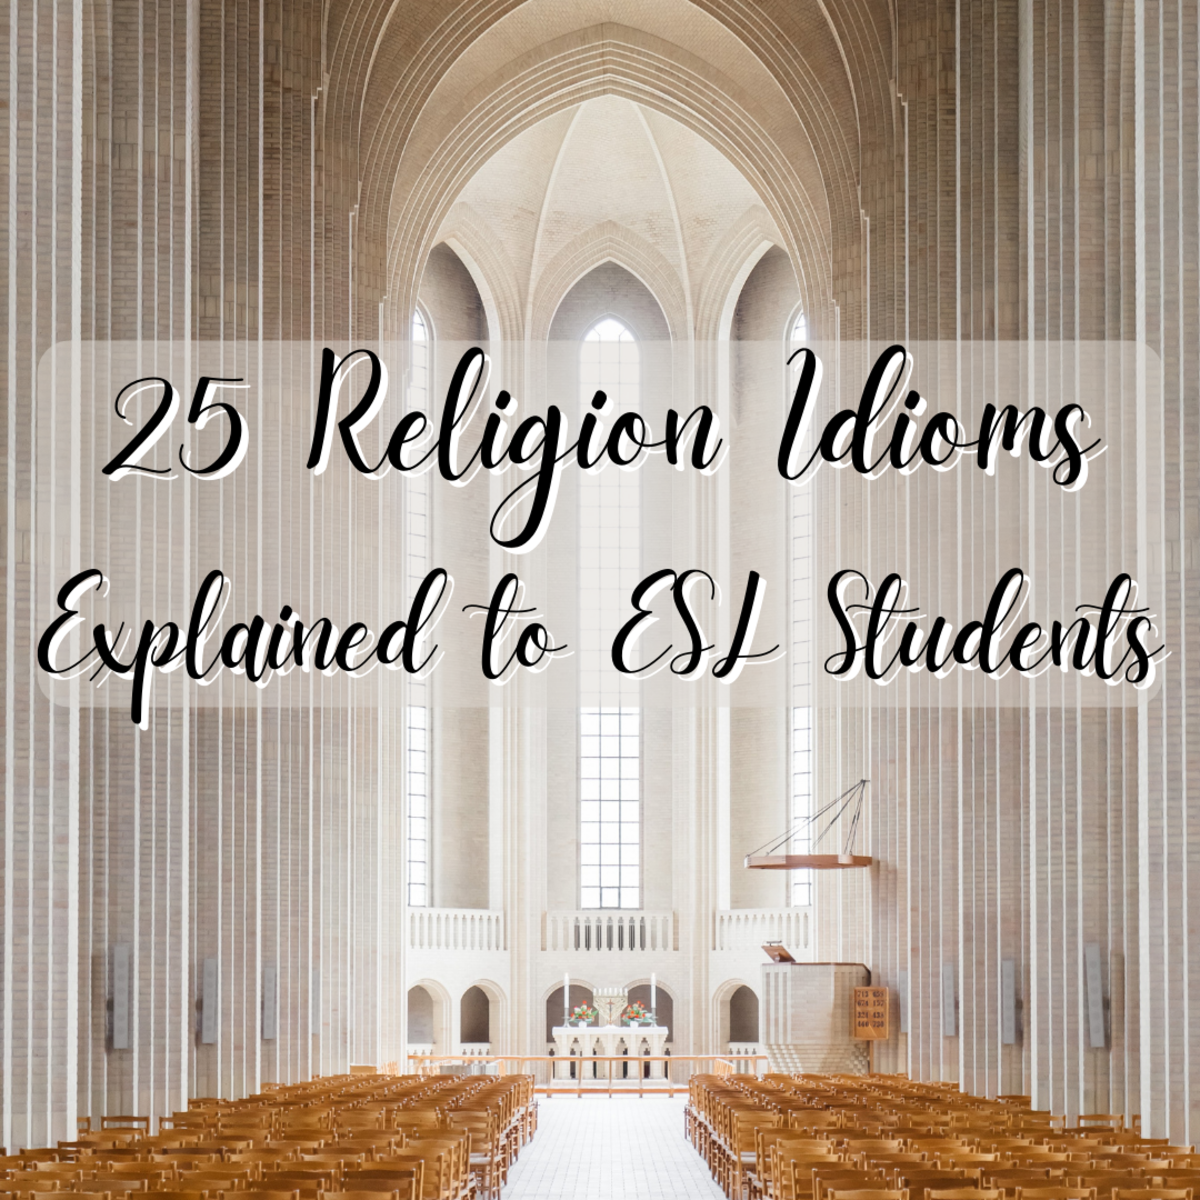 25 Religion Idioms Explained to ESL Learners